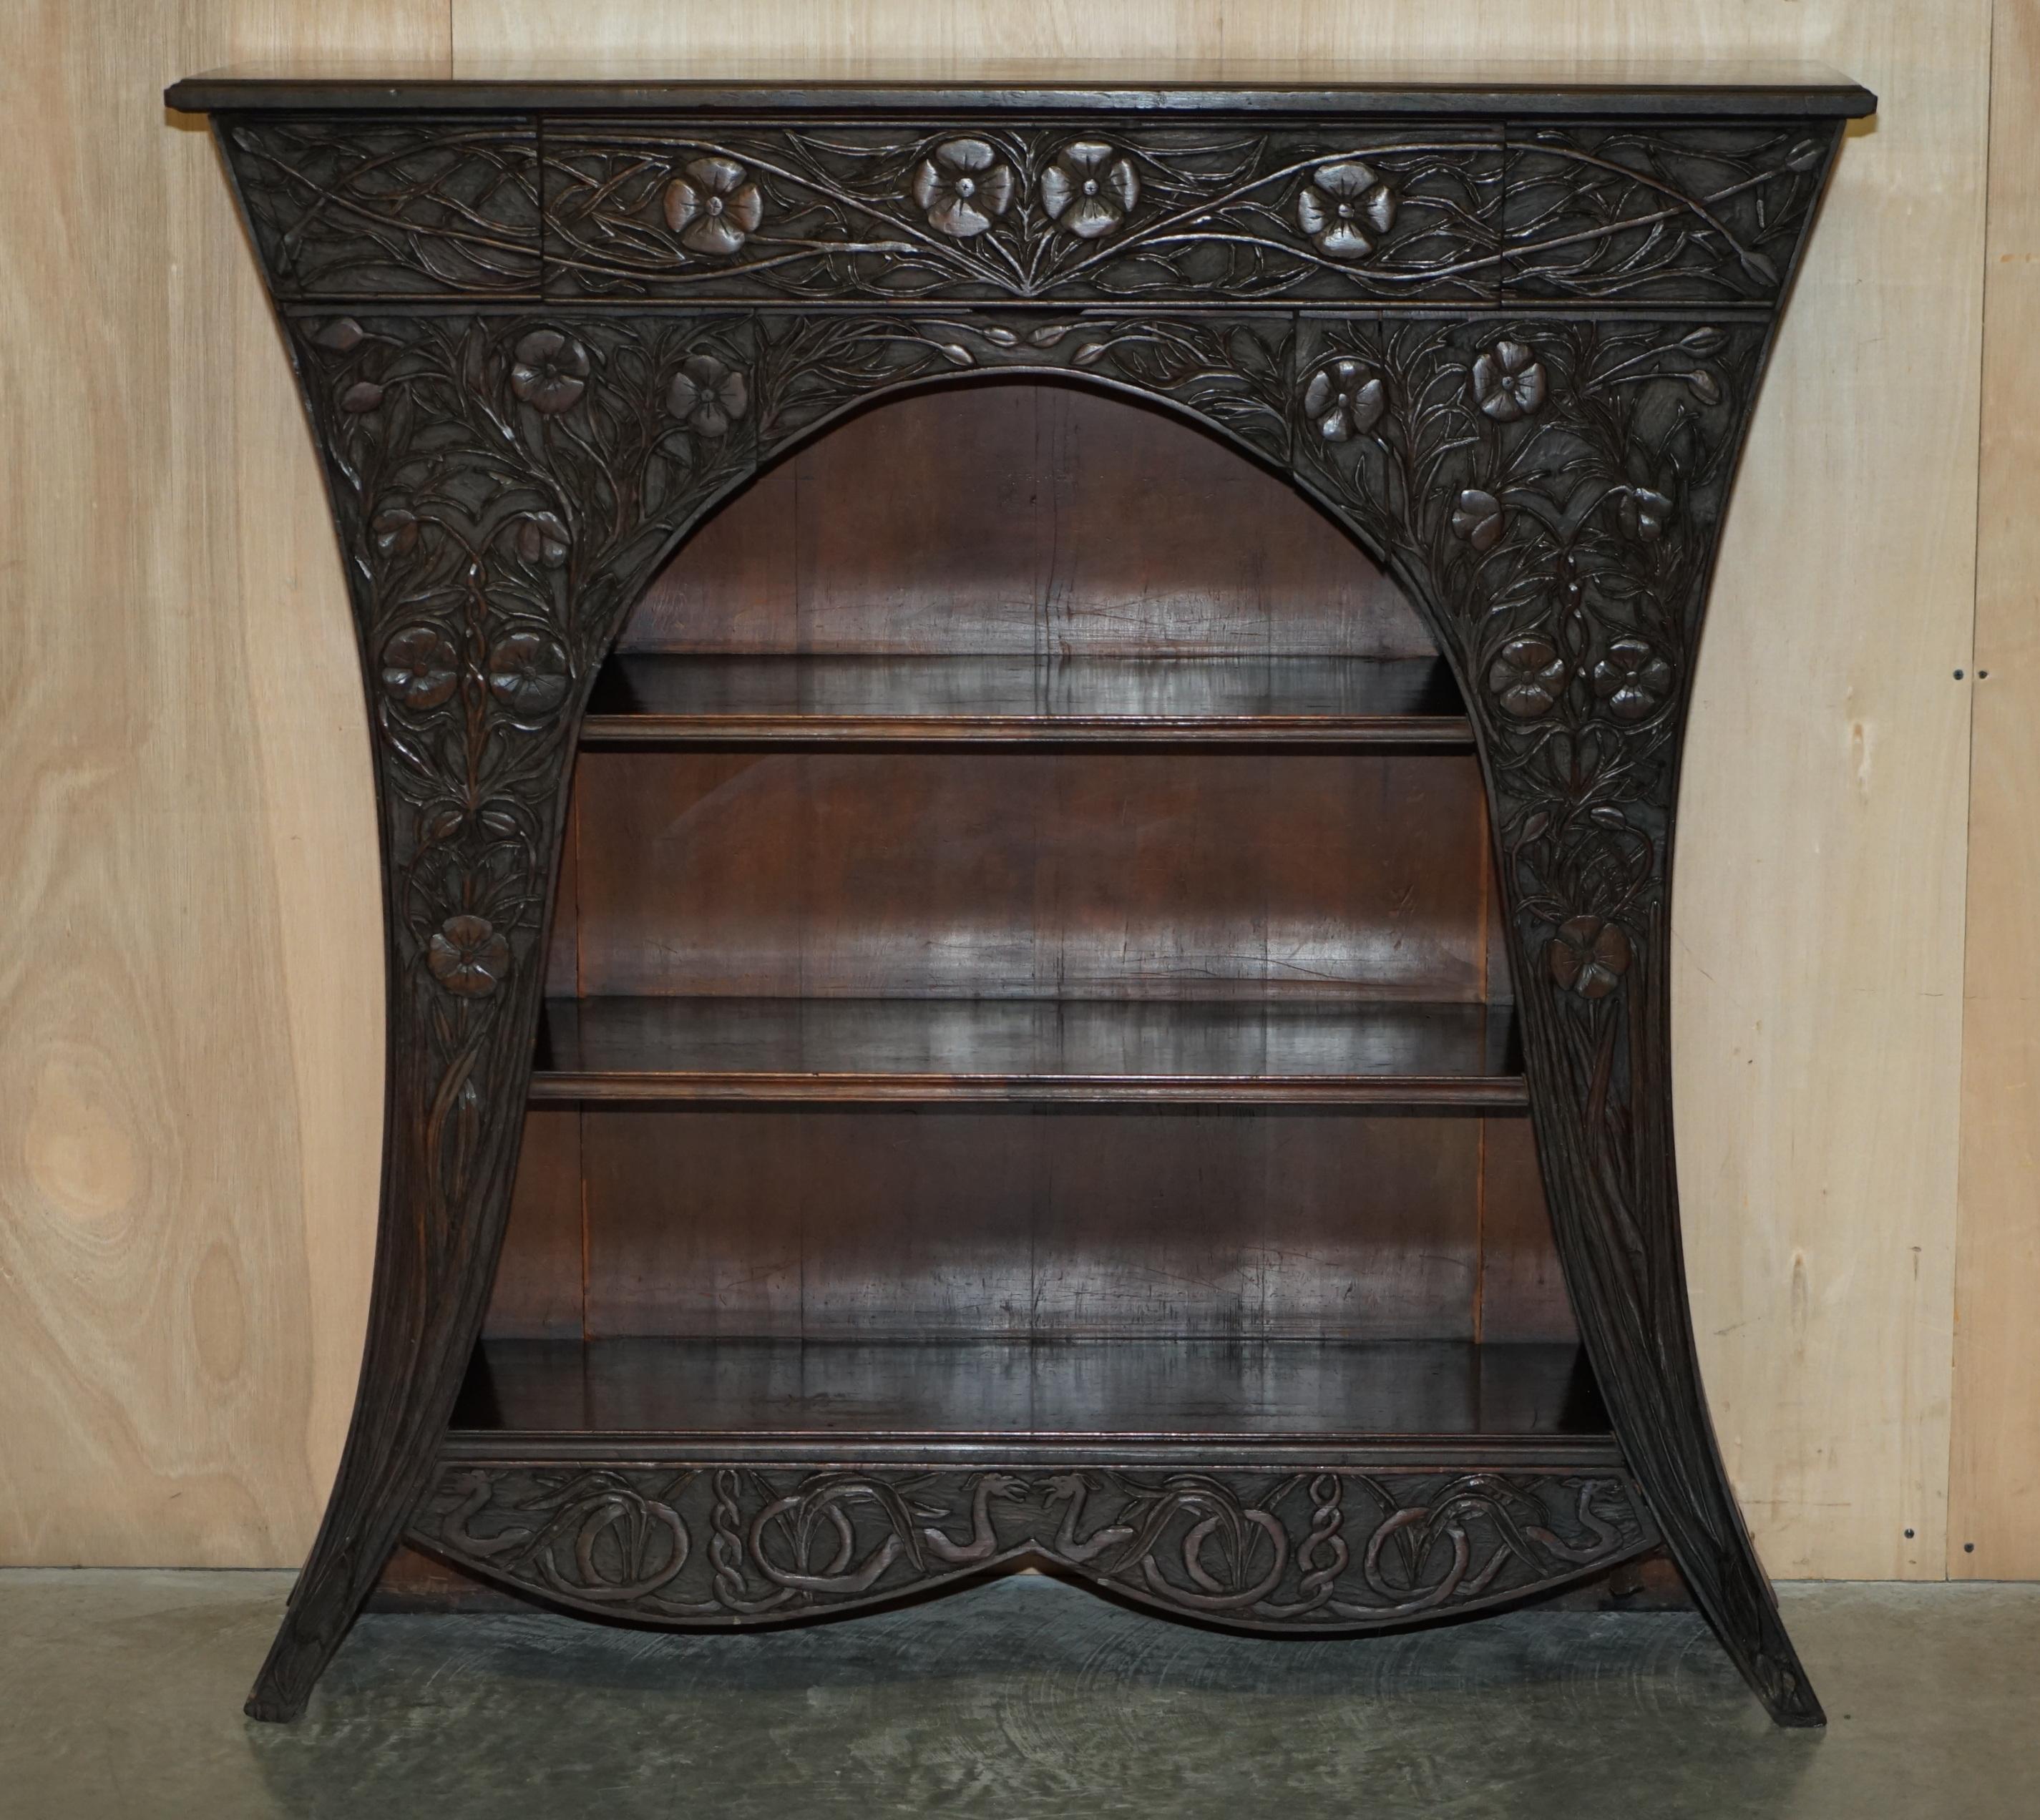 Royal House Antiques

Royal House Antiques is delighted to offer for this really quite stunning Antique circa 1860-1880 Art Nouveau style bookcase which is wonderfully curved to the sides and has ornate carvings to the front 

Please note the